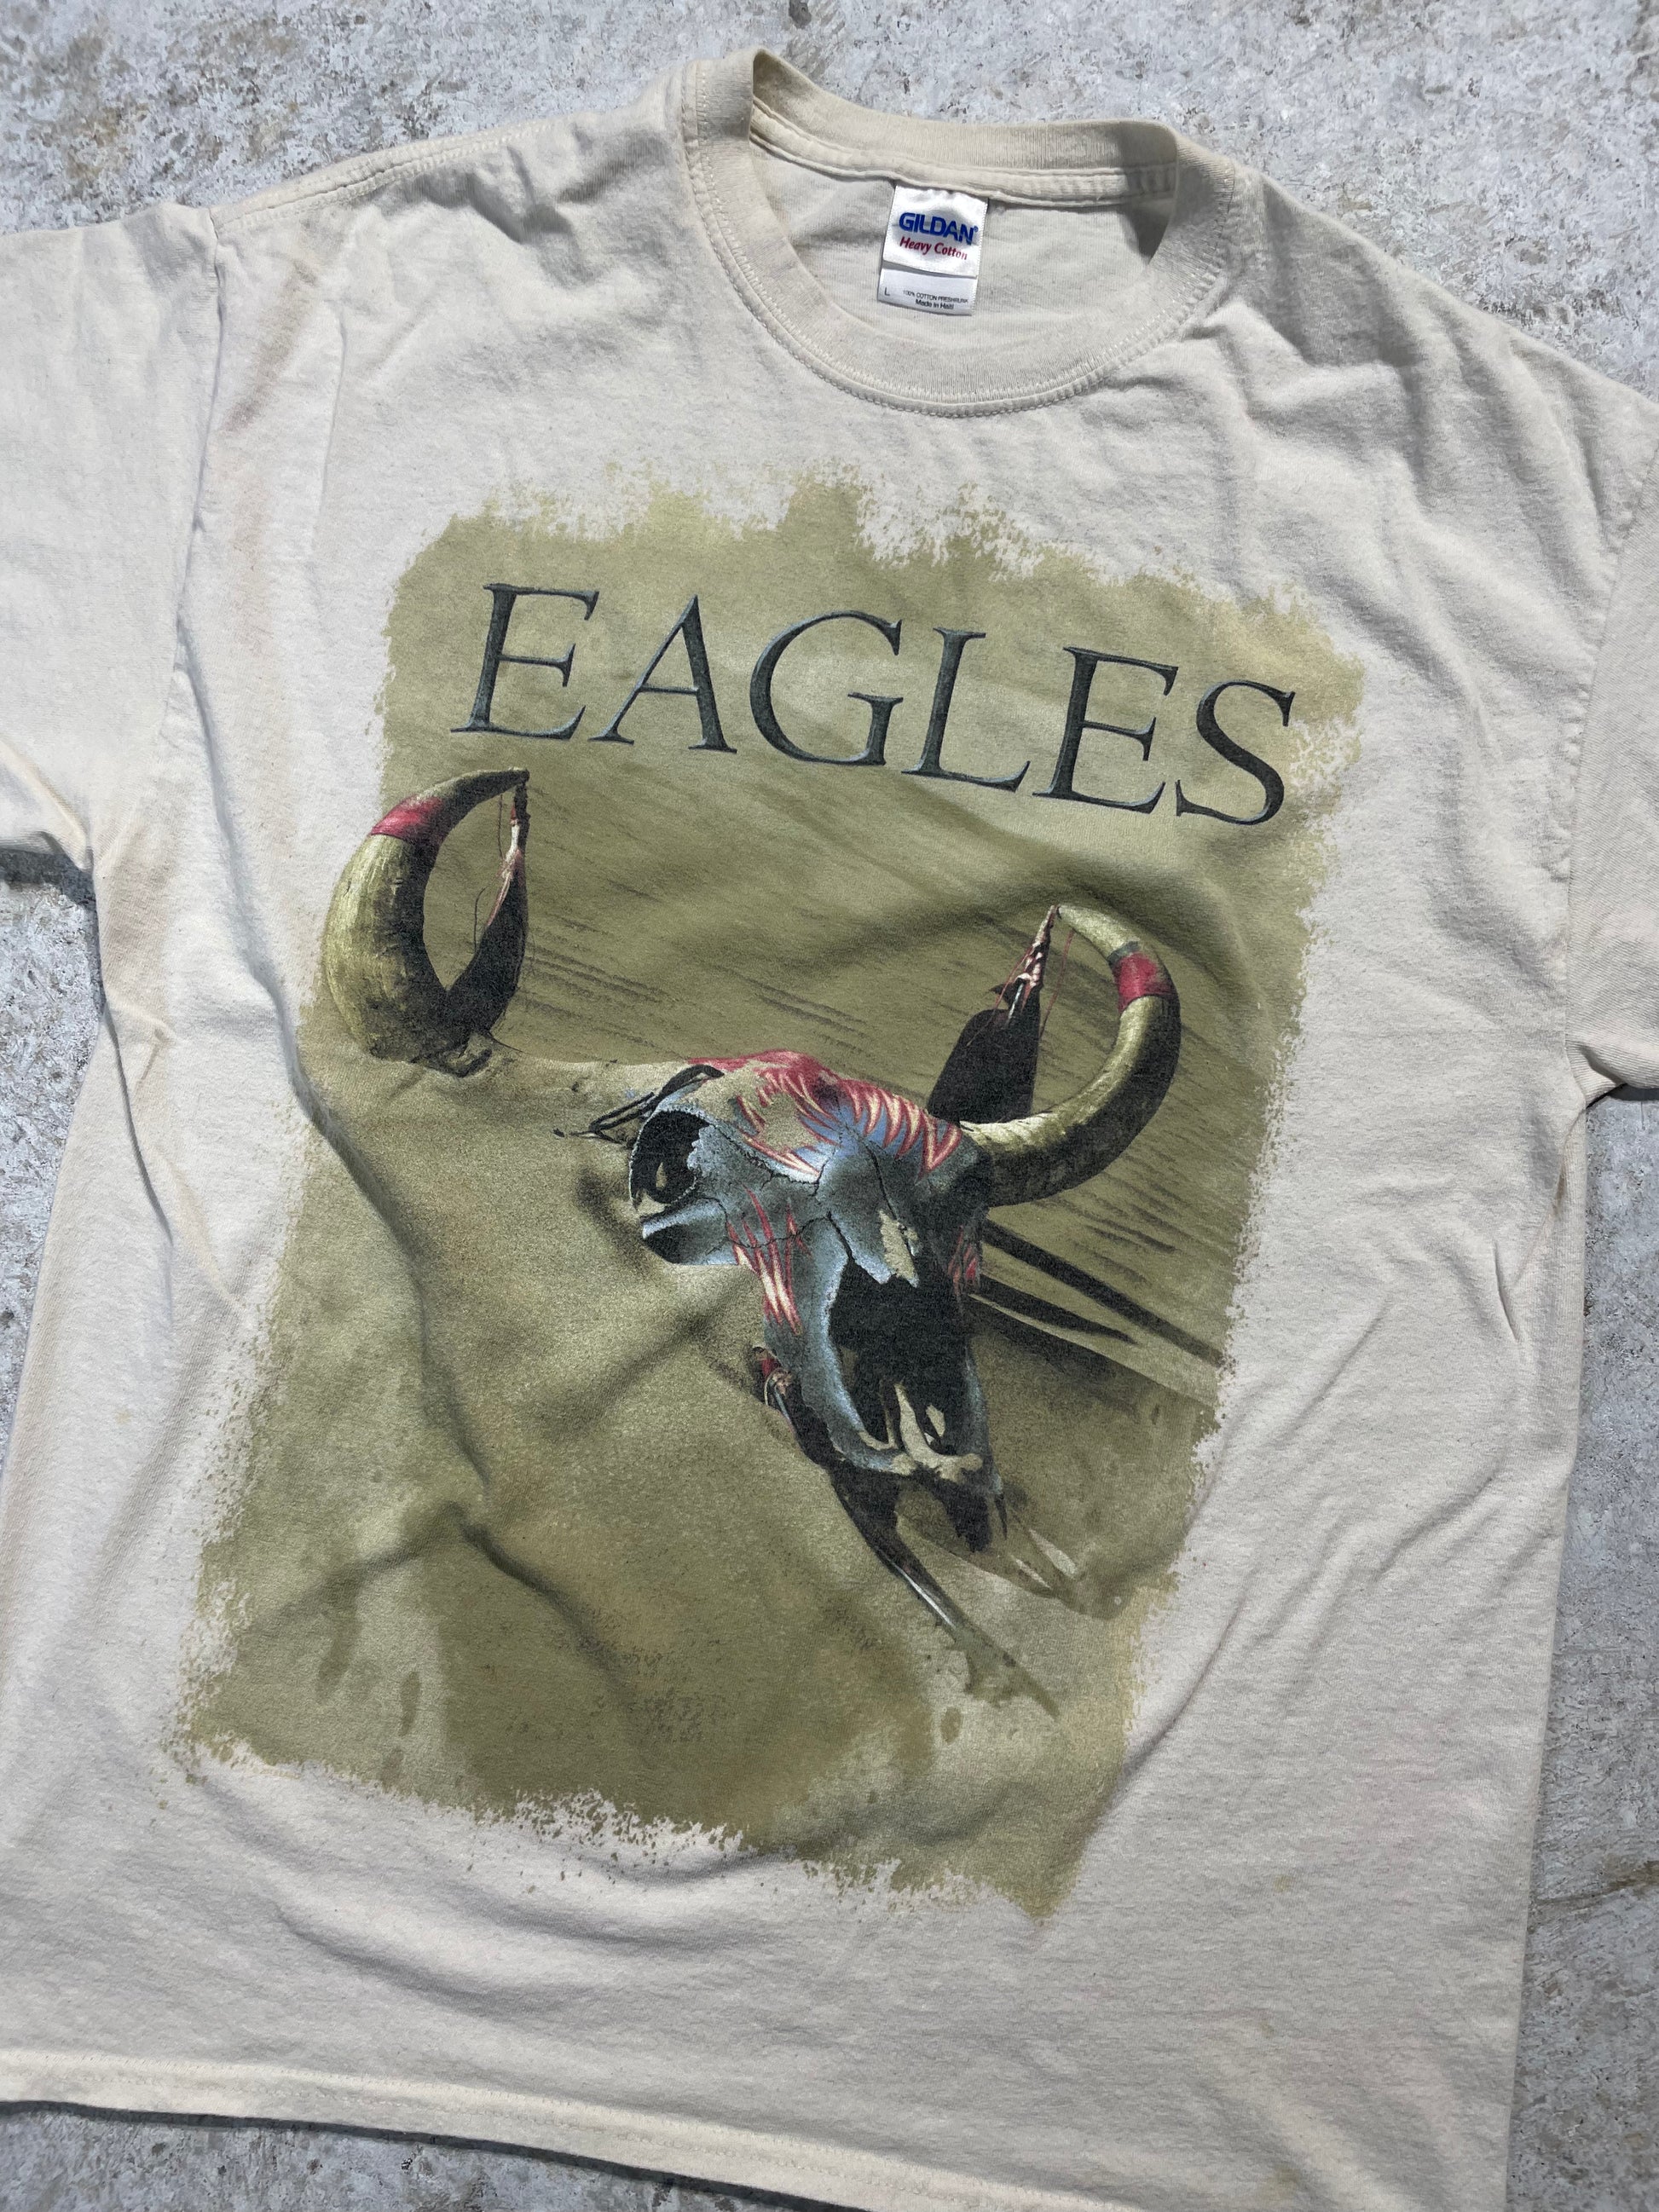 2013 History of the Eagles Tour (Large), Tee - Vintage64.com